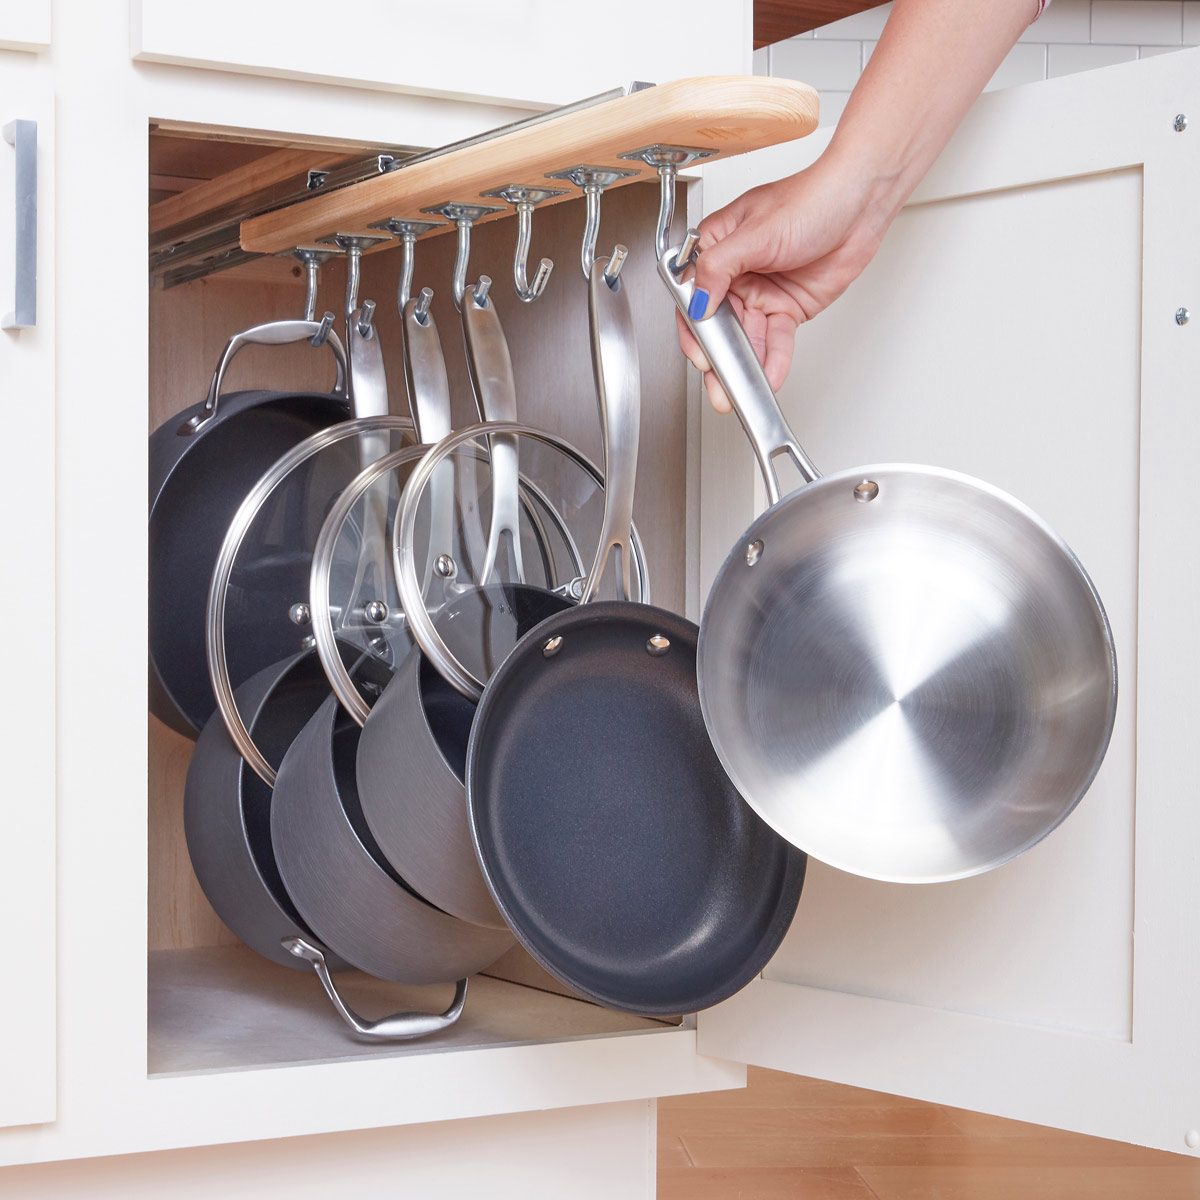 How to Make a Pot and Pan Pullout to Increase Kitchen Cabinet